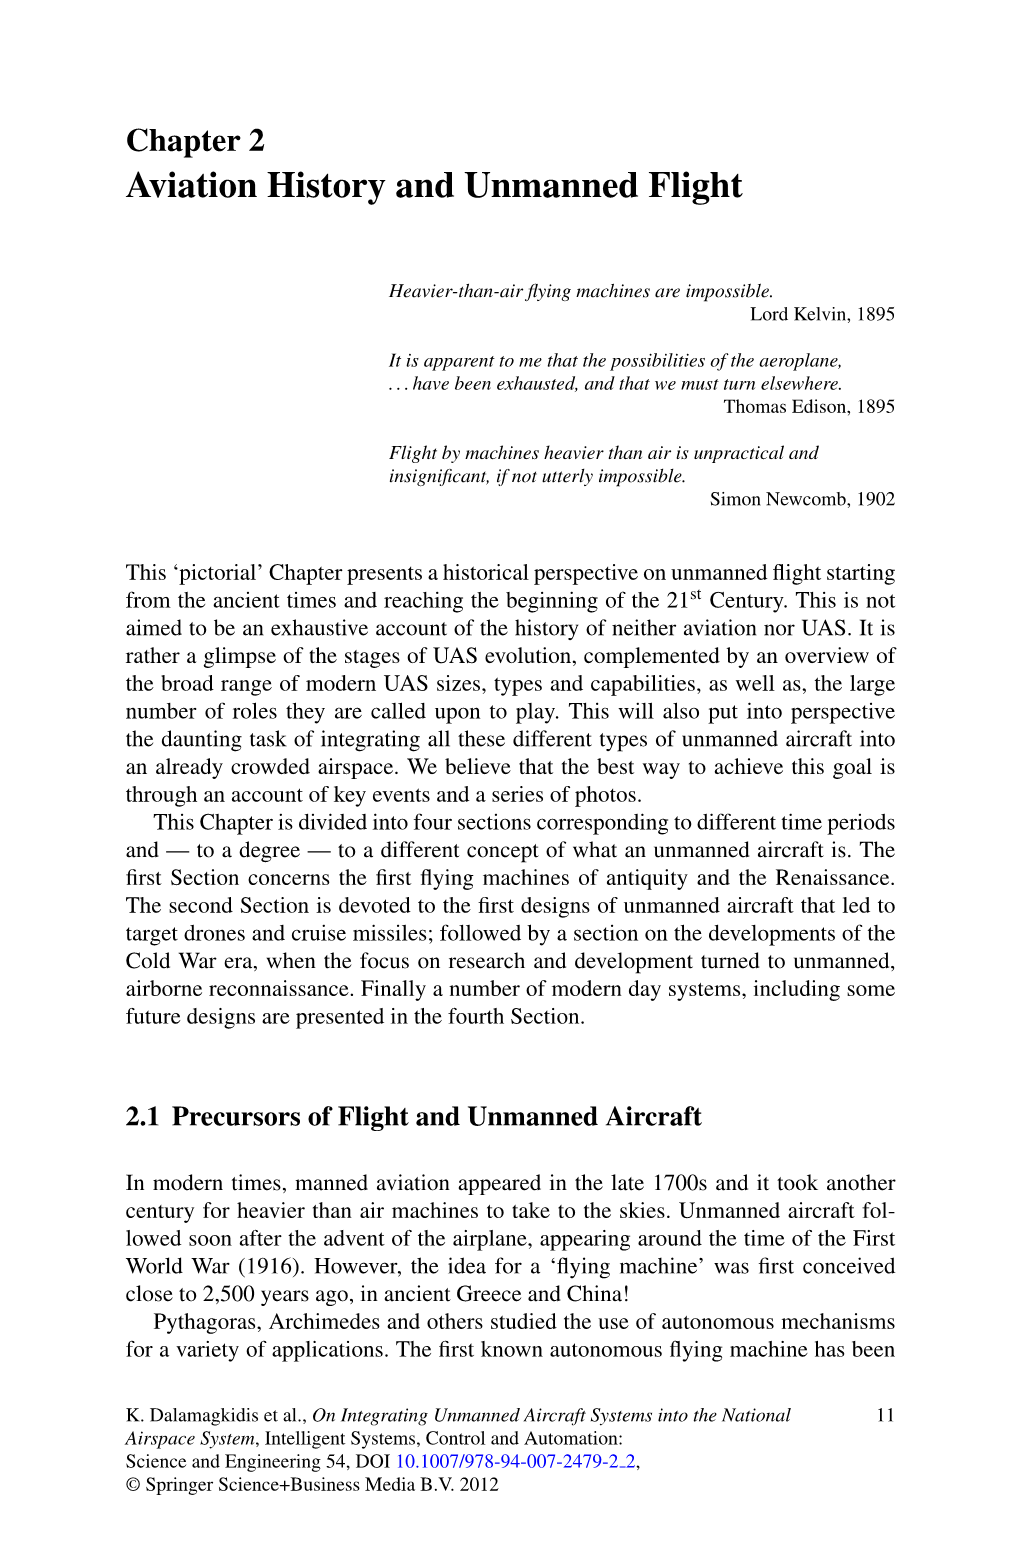 Aviation History and Unmanned Flight